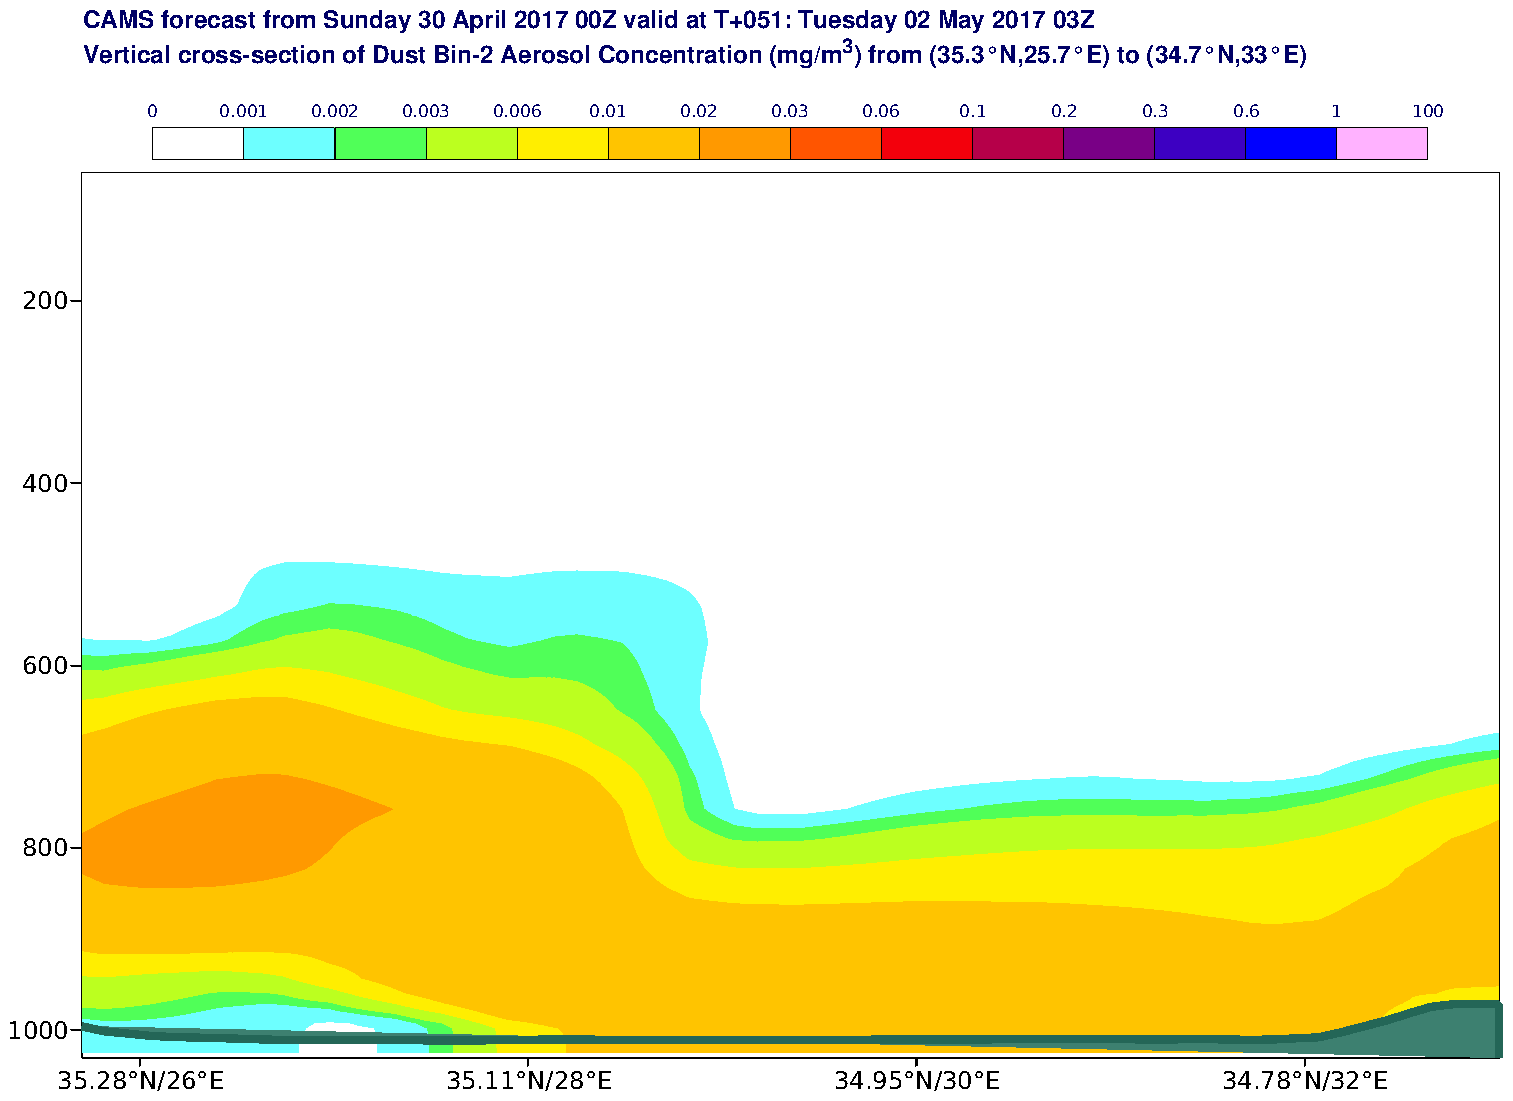 Vertical cross-section of Dust Bin-2 Aerosol Concentration (mg/m3) valid at T51 - 2017-05-02 03:00